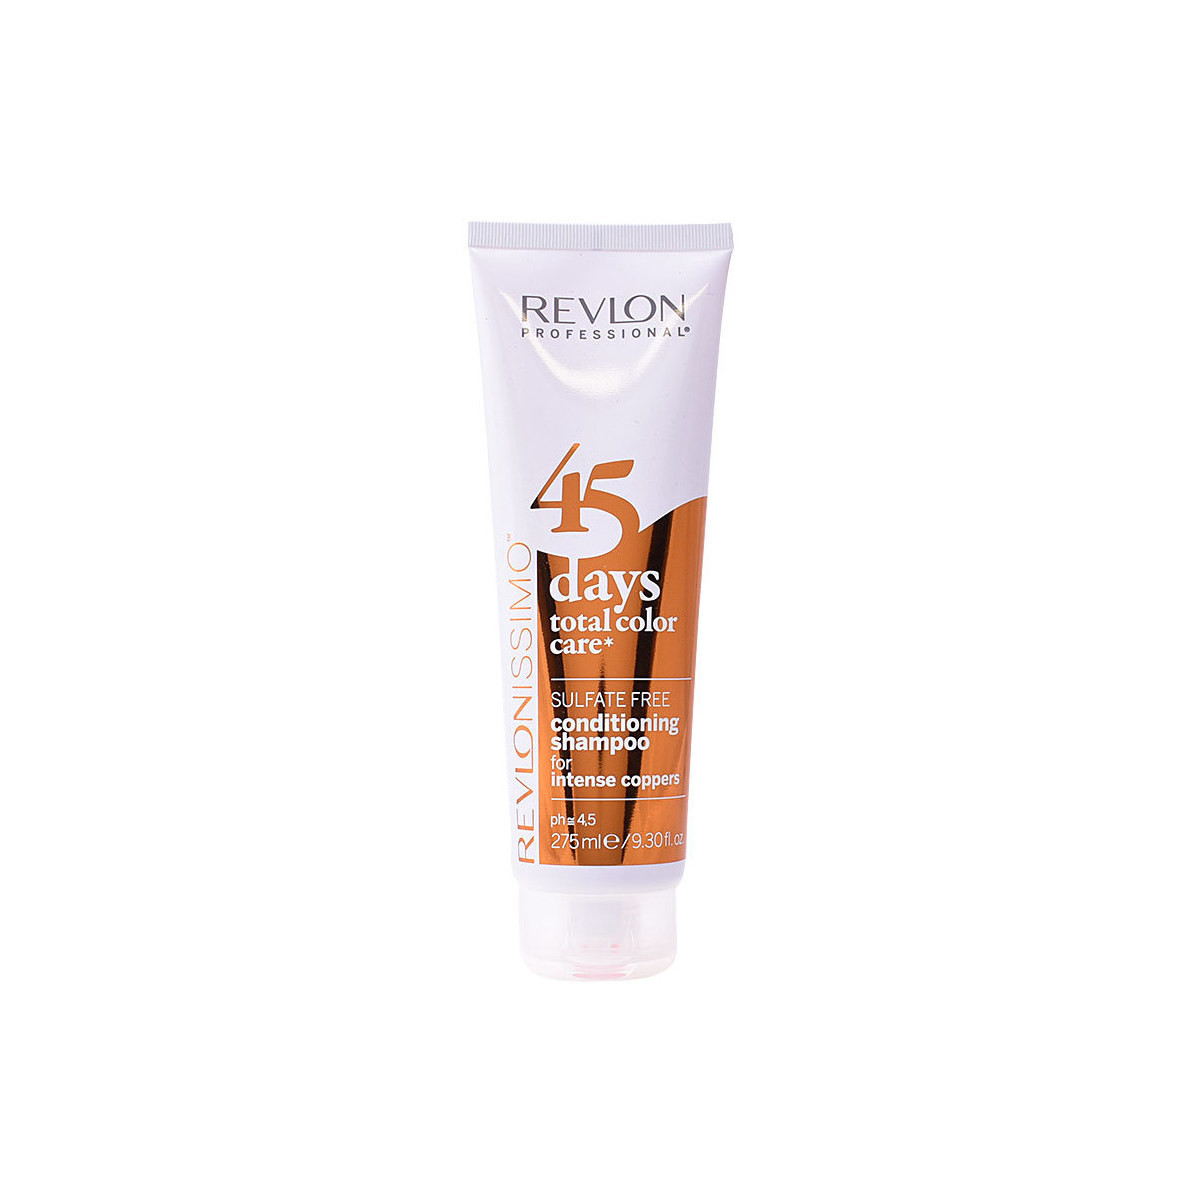 Bellezza Shampoo Revlon 45 Days Conditioning Shampoo For Intense Coppers 